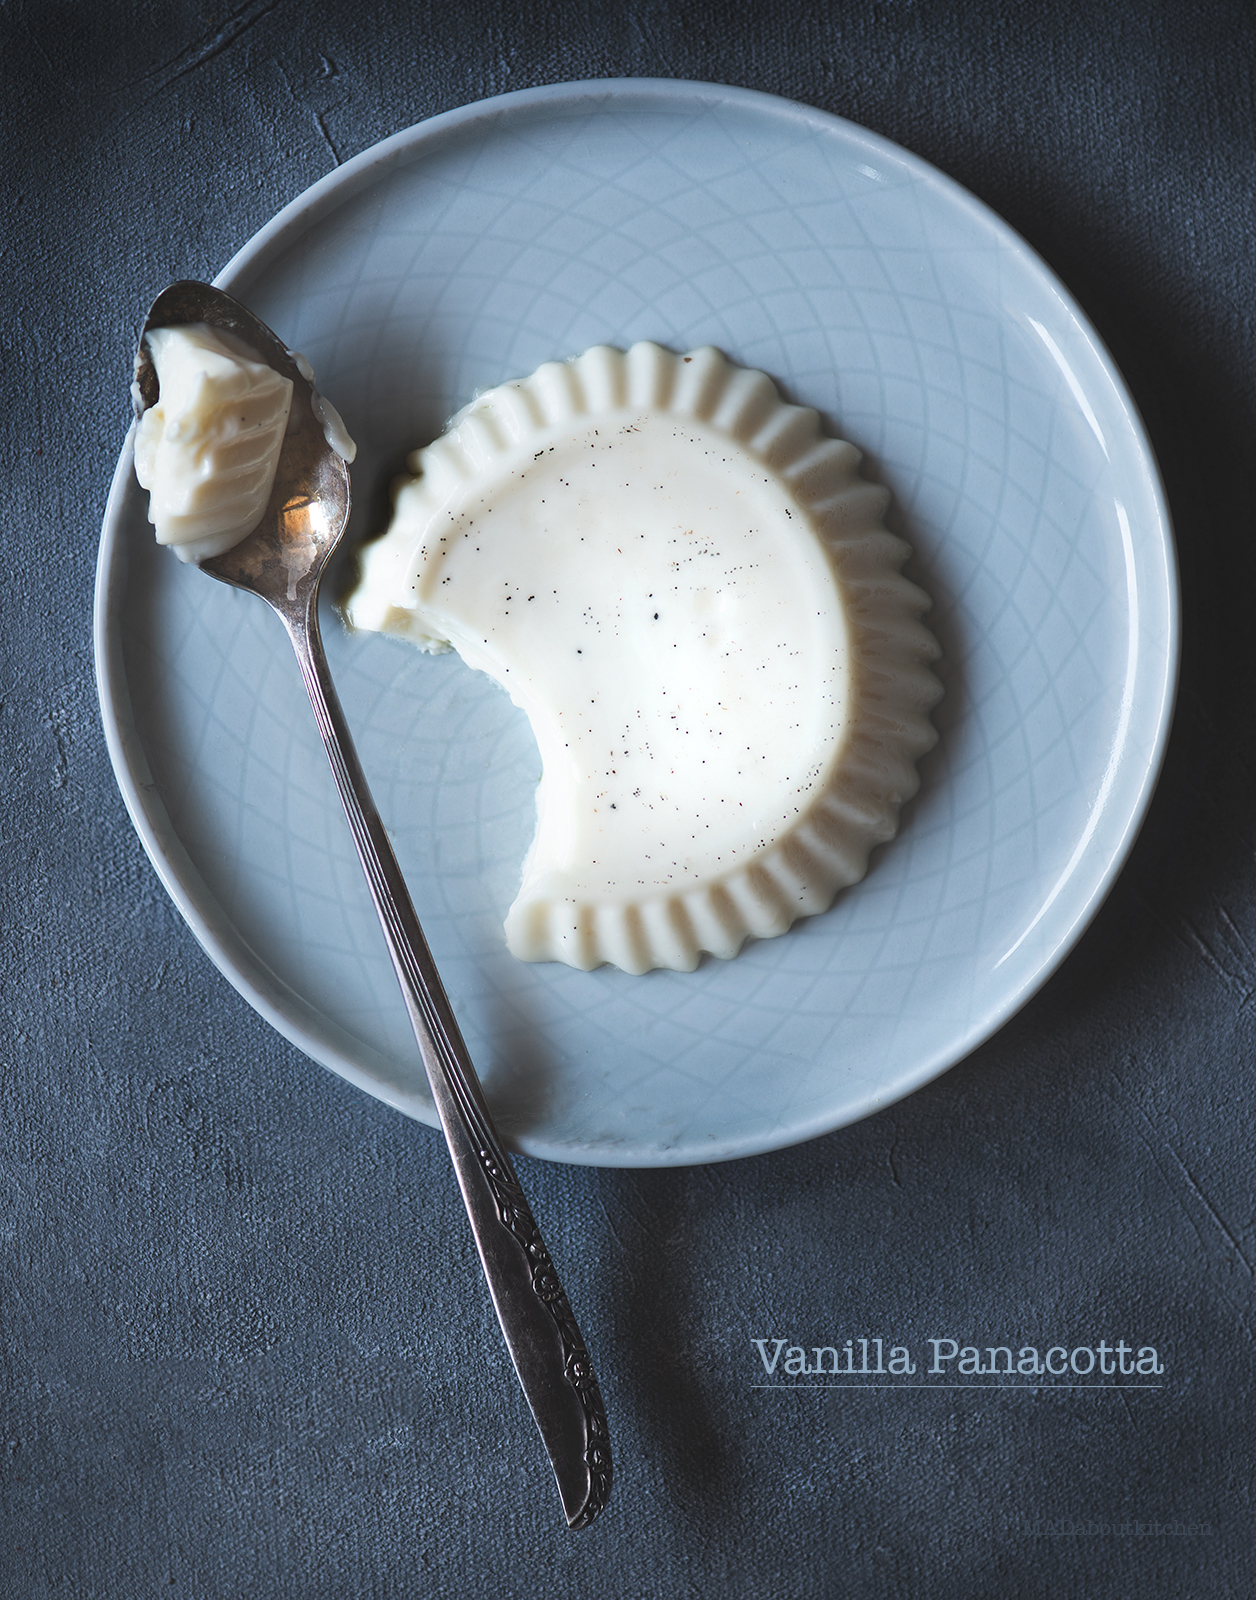  Vanilla Panacotta is a basic Italian pudding that is made using cream and thickening agent.The name Panacotta iterally means “cooked cream,”